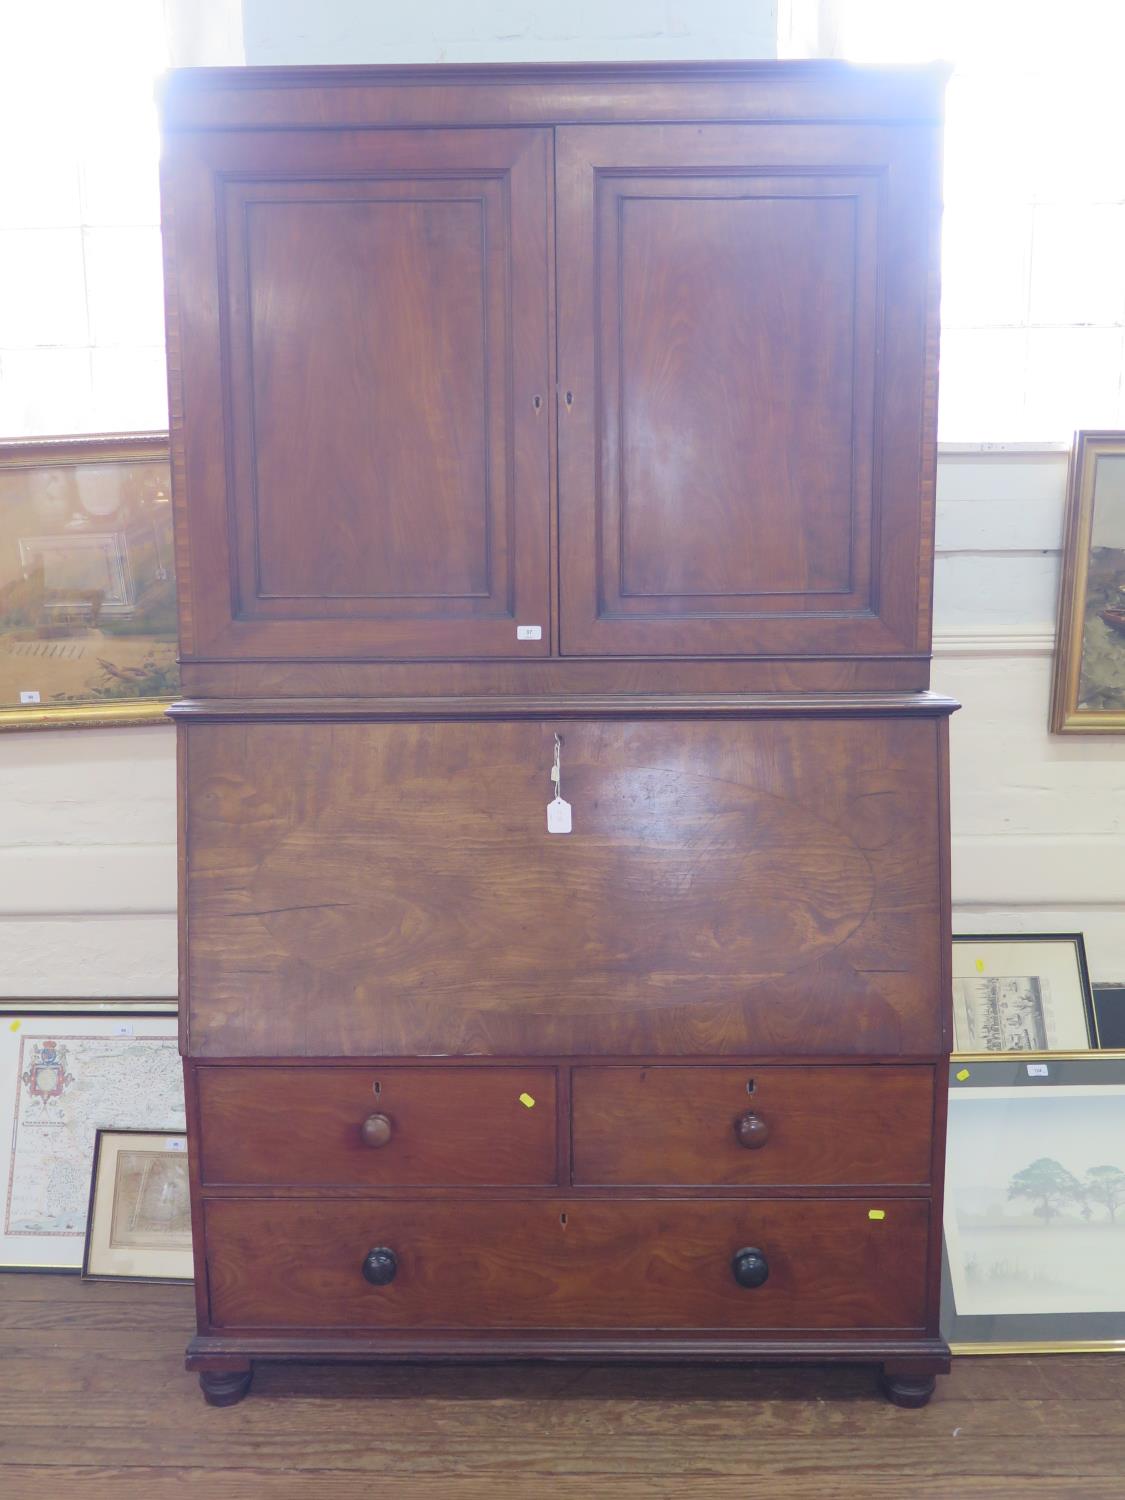 An early 19th century mahogany secretaire cabinet, the pair of panelled doors enclosing adjustable